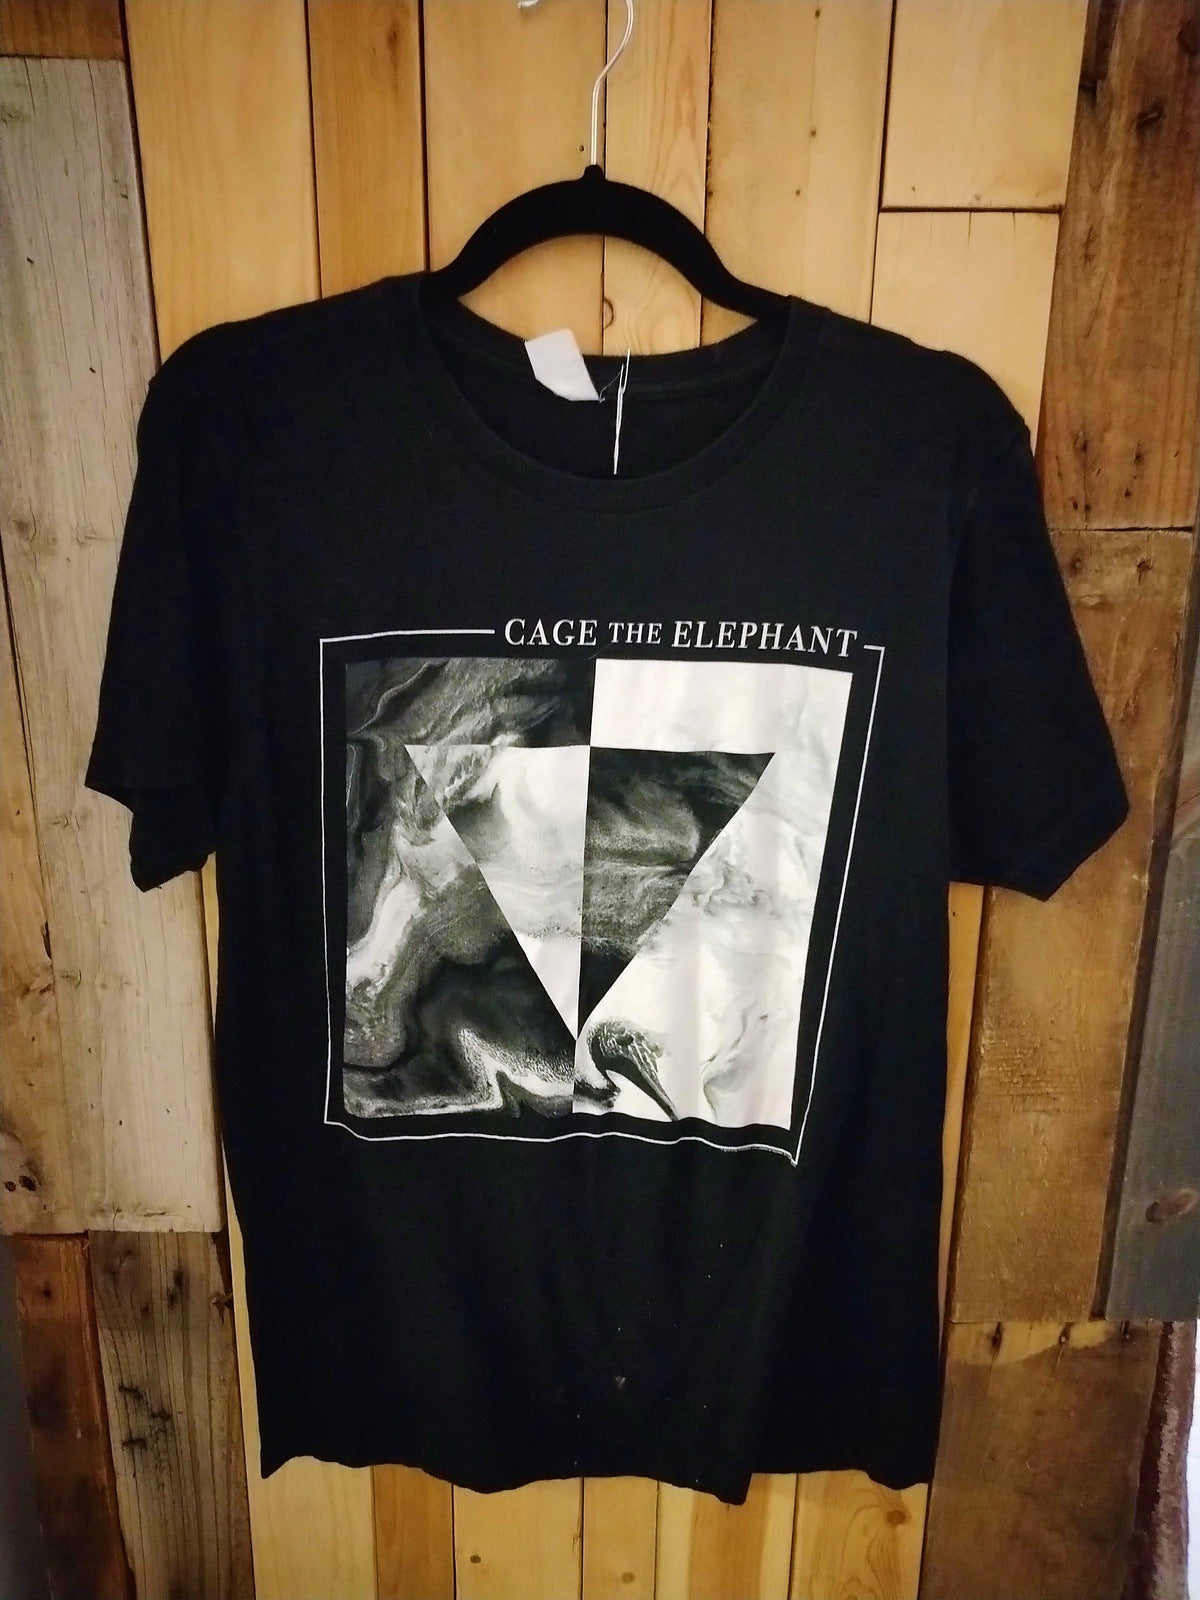 Cage The Elephant T Shirt Size Medium As Is Small Stains on Front